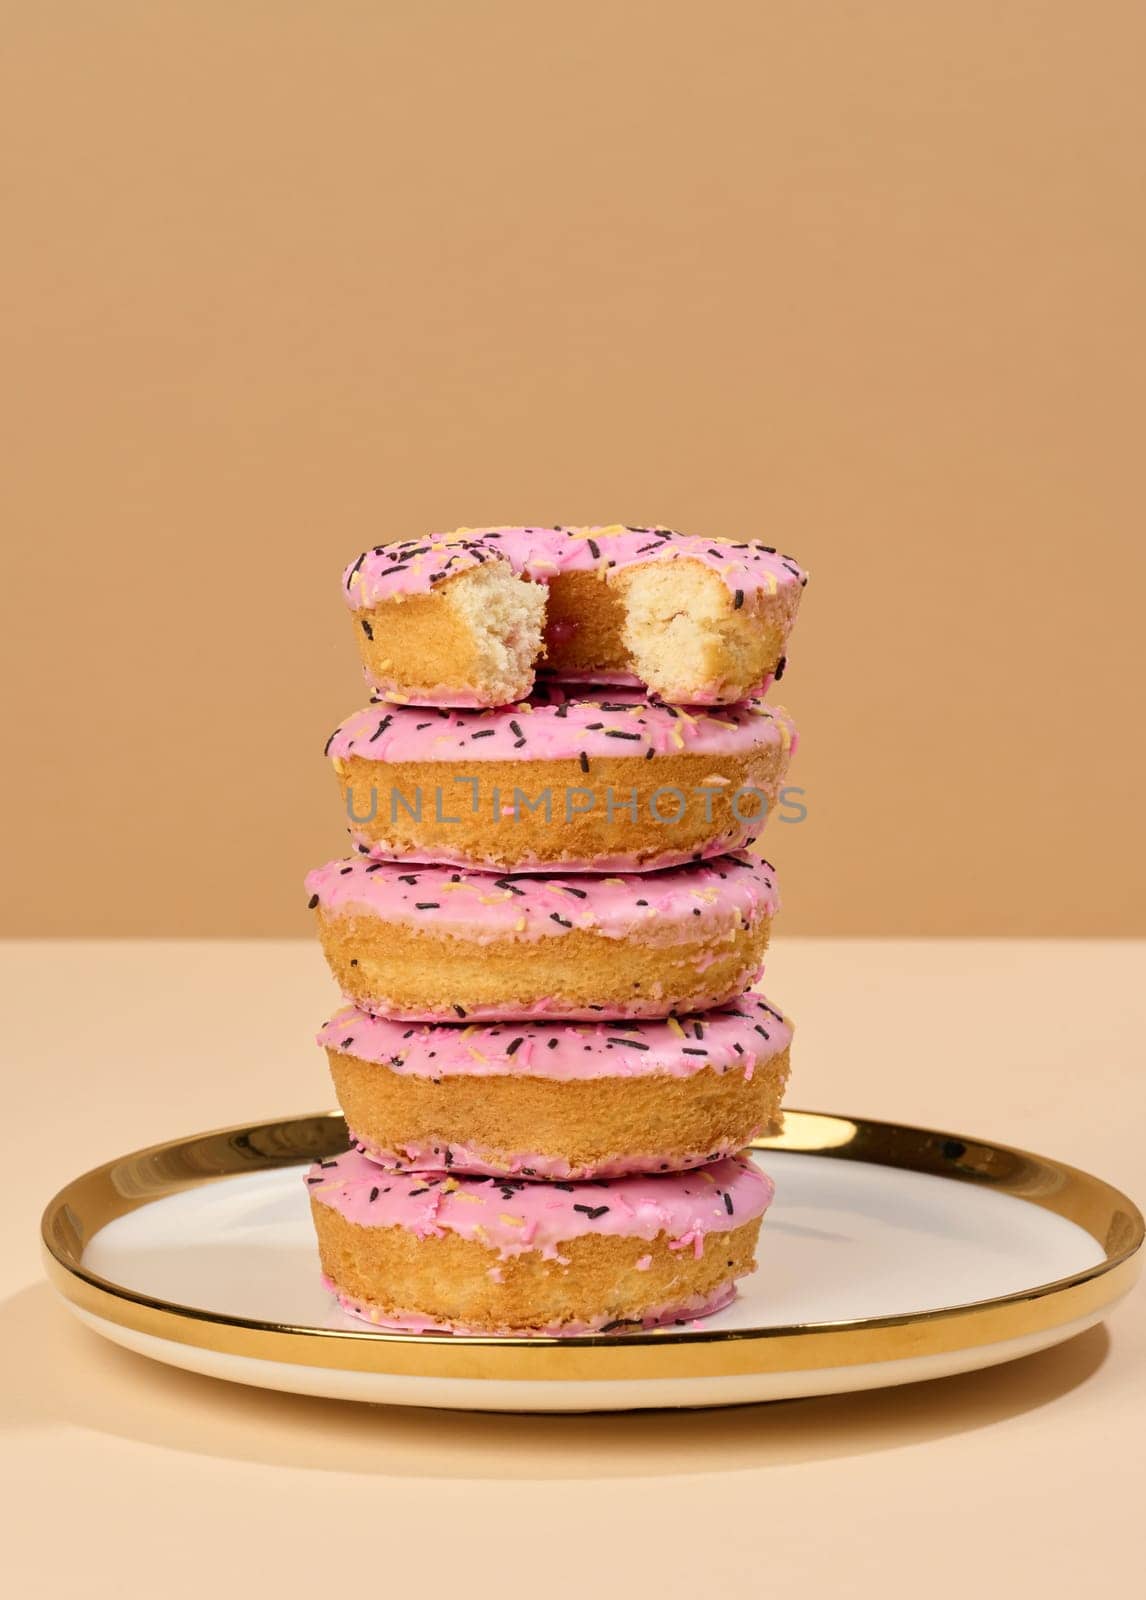 Donut covered with pink glaze and sprinkled with colorful sprinkles on a round plate, brown background by ndanko